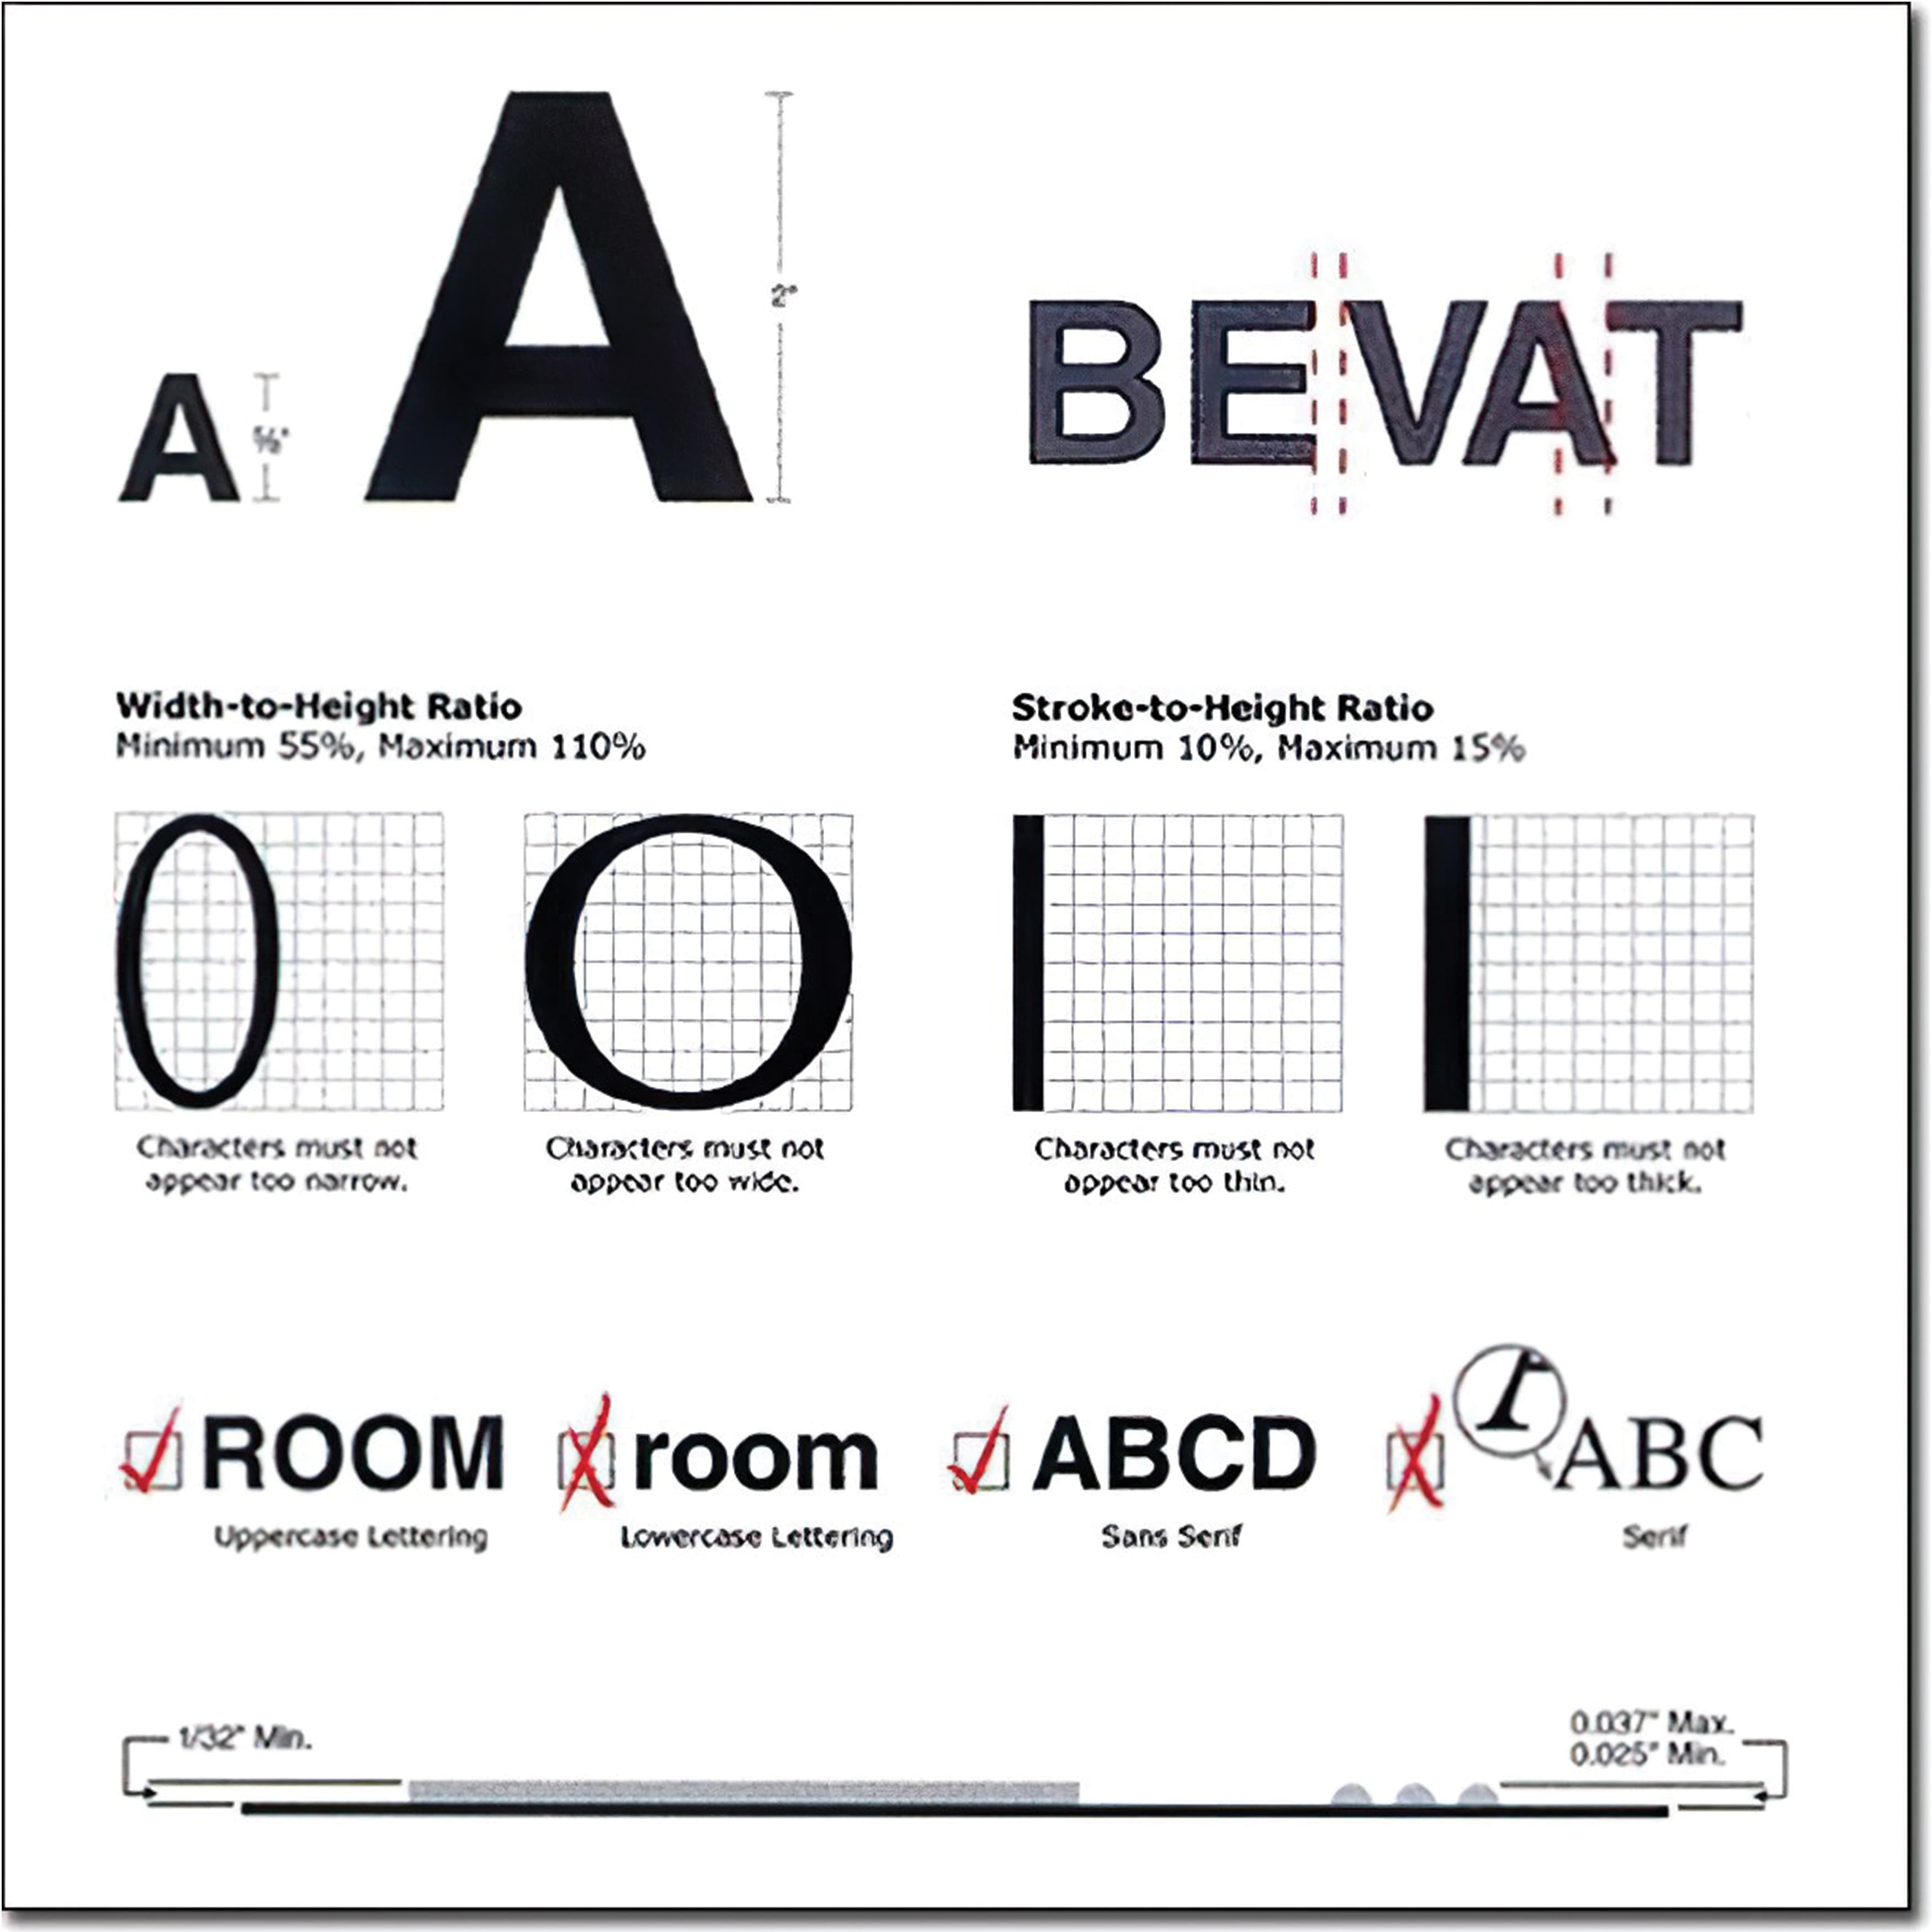 A diagram showing some ADA code requirements for signage plaques.